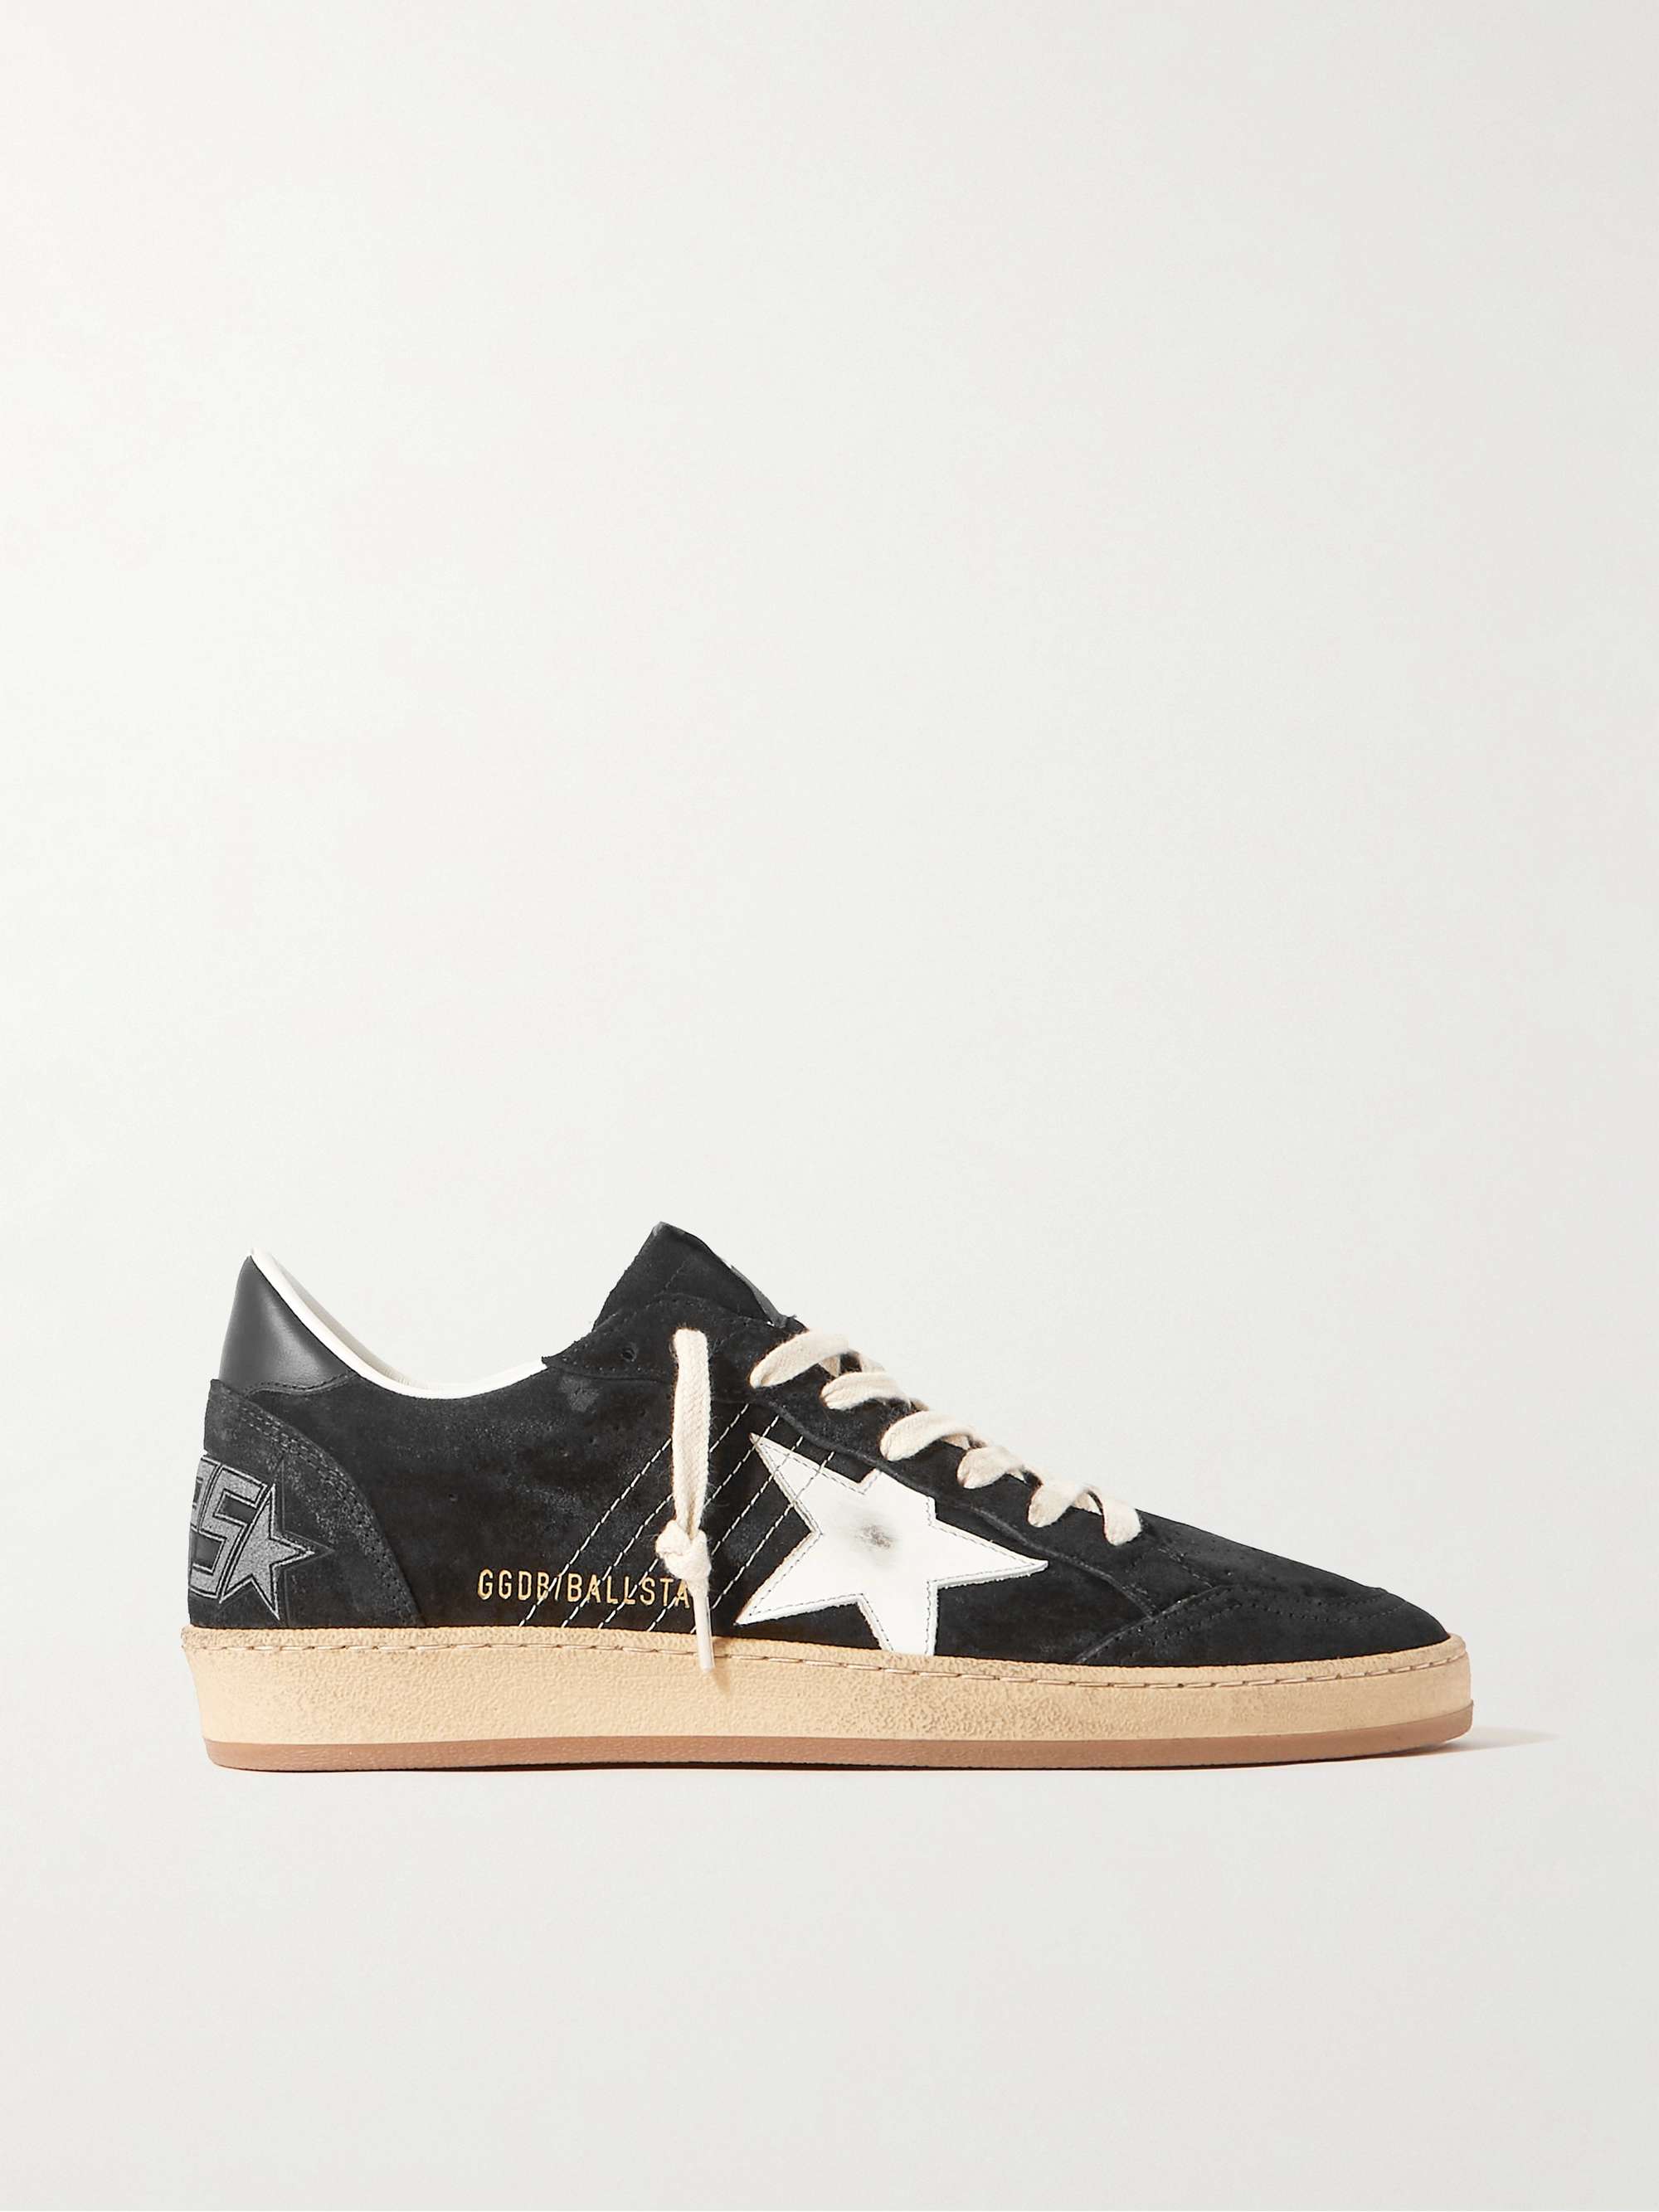 GOLDEN GOOSE Ball Star Distressed Suede and Leather Sneakers | MR PORTER